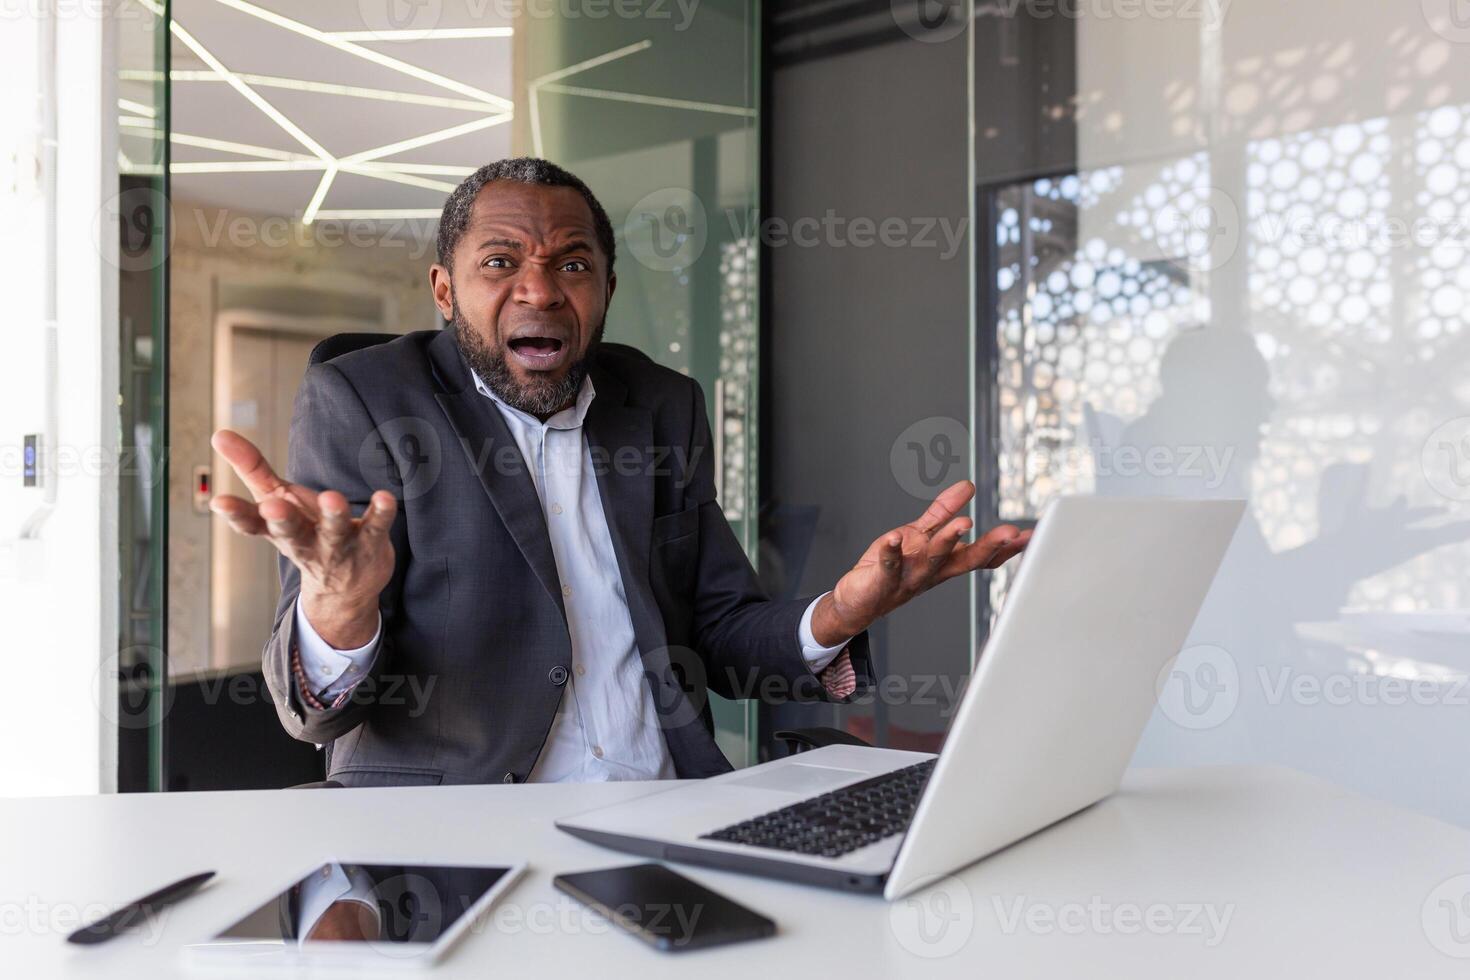 Frustrated angry boss looking at camera, senior gray haired mature man shouting upset, businessman inside office unhappy with achievement results, working with laptop. photo